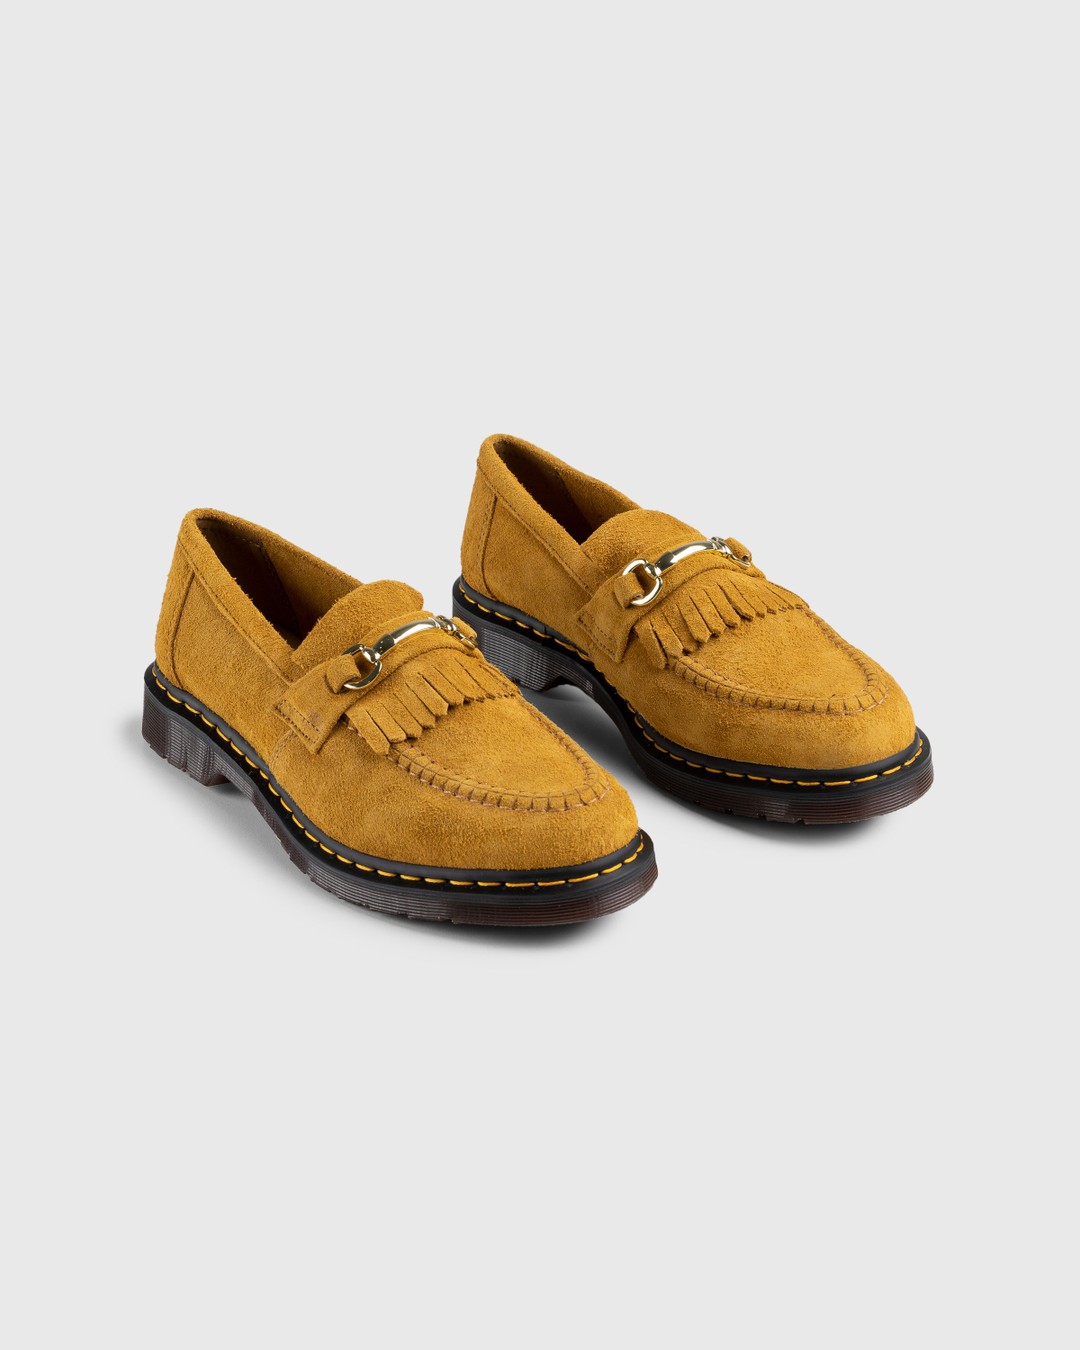 Dr. Martens – Adrian Snaffle Suede Loafers Light Tan Desert Oasis Suede (Gum Oil) - Loafers - Brown - Image 3